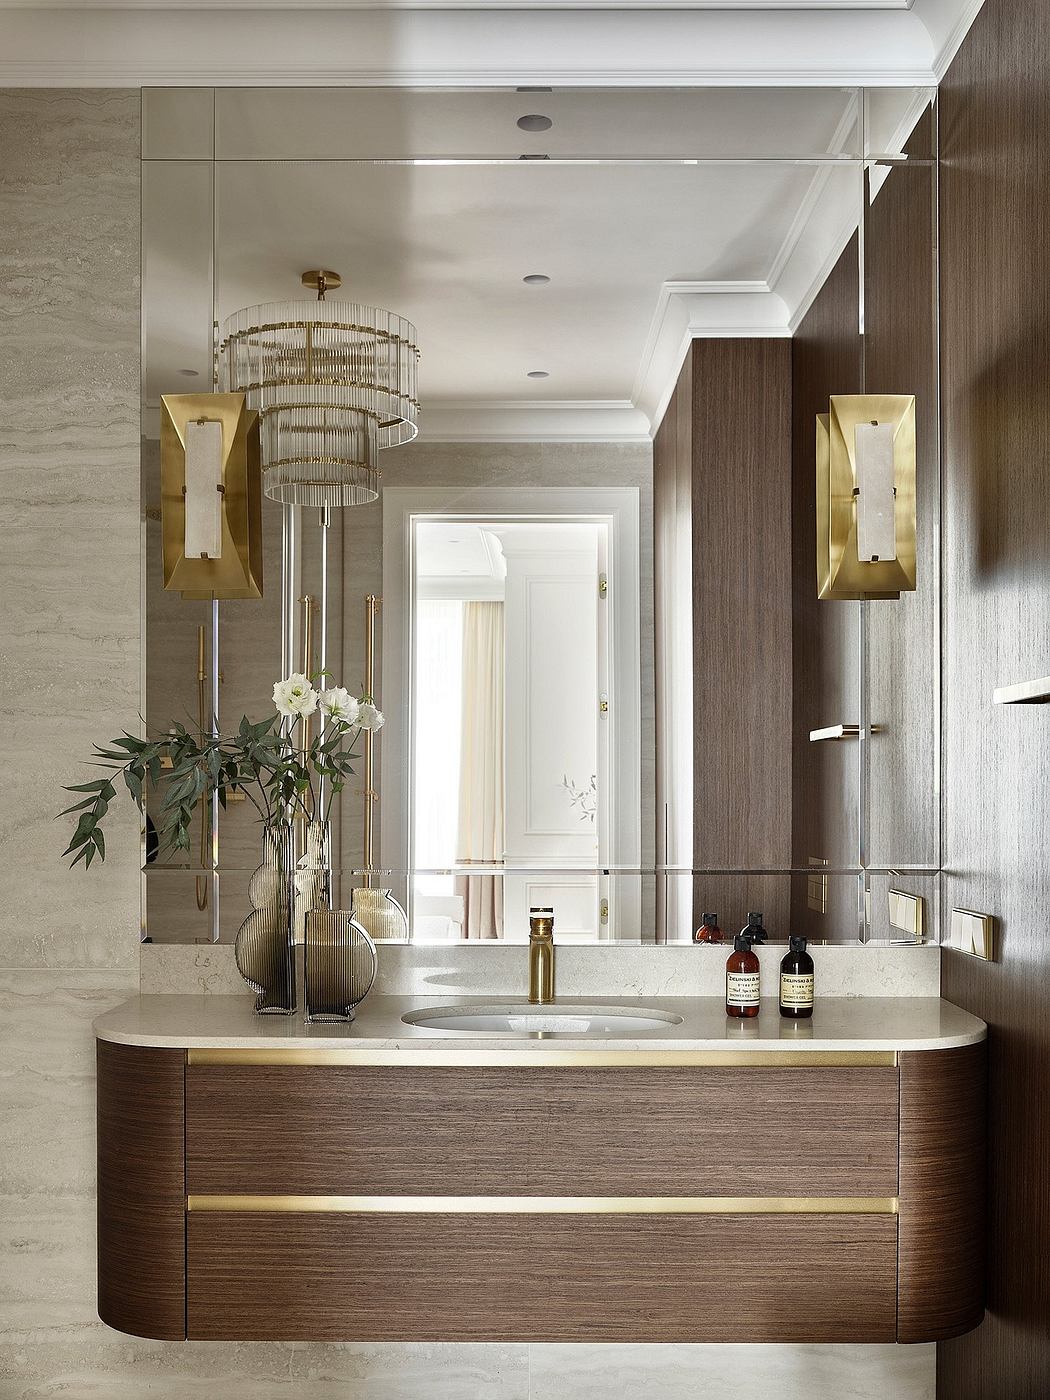 Elegant bathroom with modern lighting fixtures, marble countertop, and wood cabinetry.